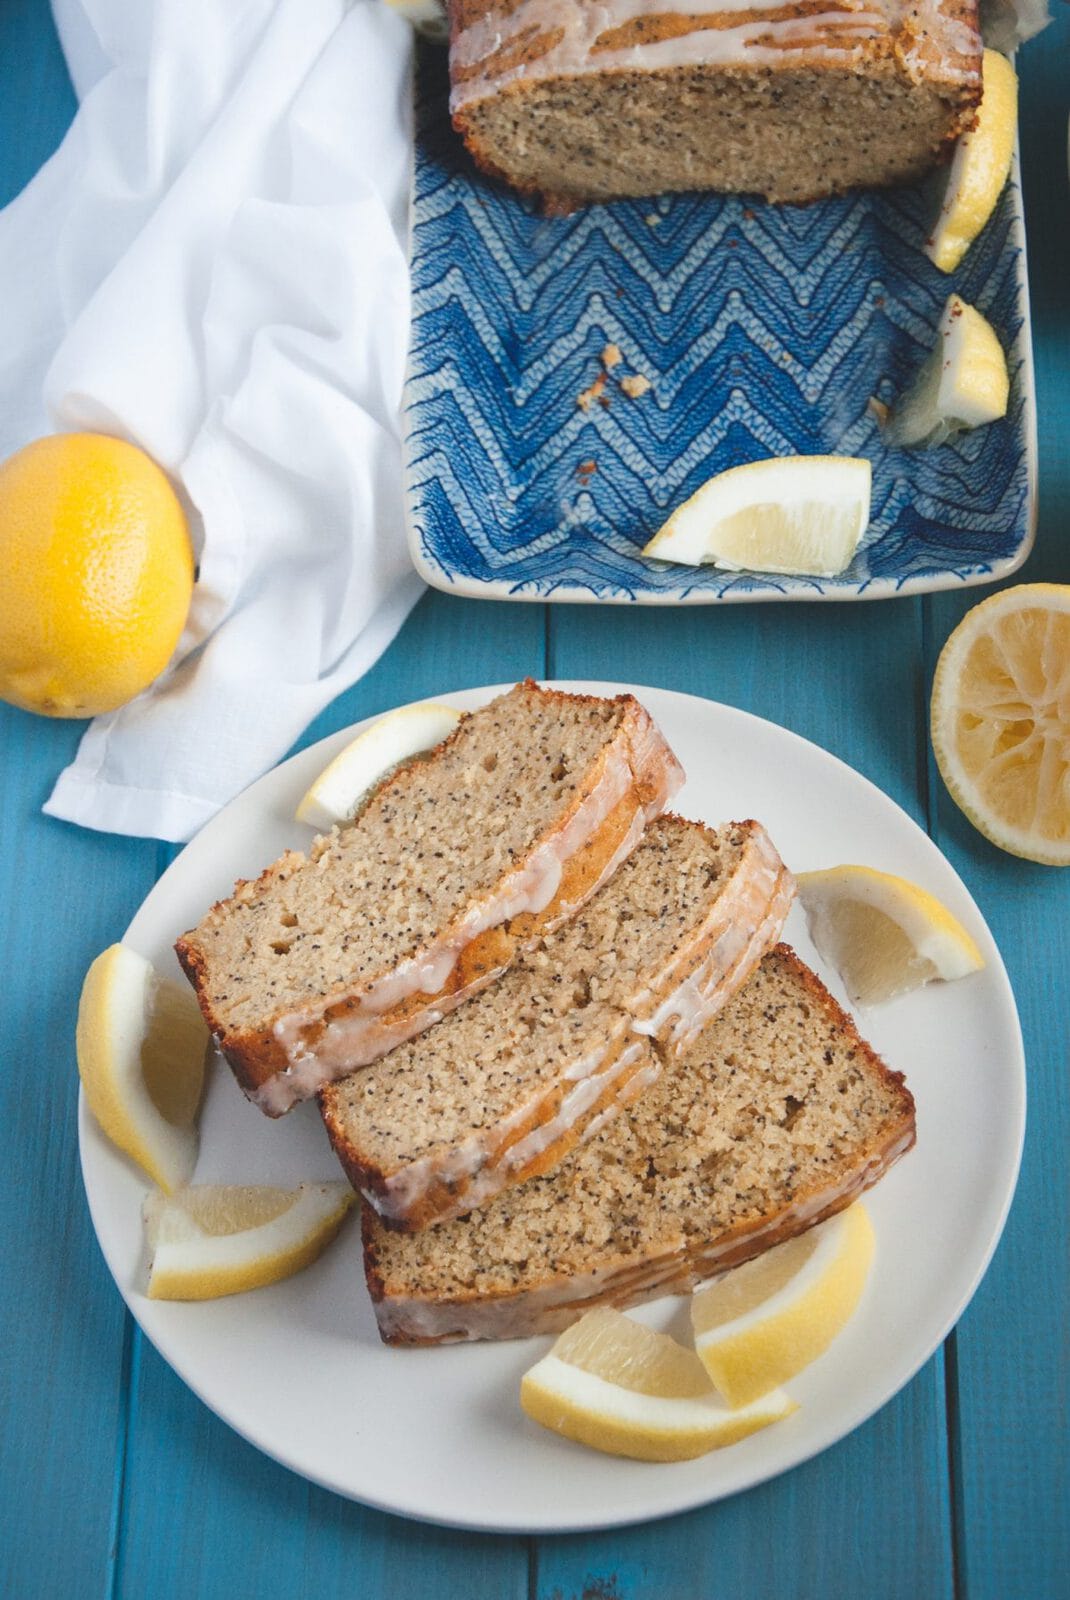 Plate with Whole Wheat Lemon Poppy Seed Bread with glaze